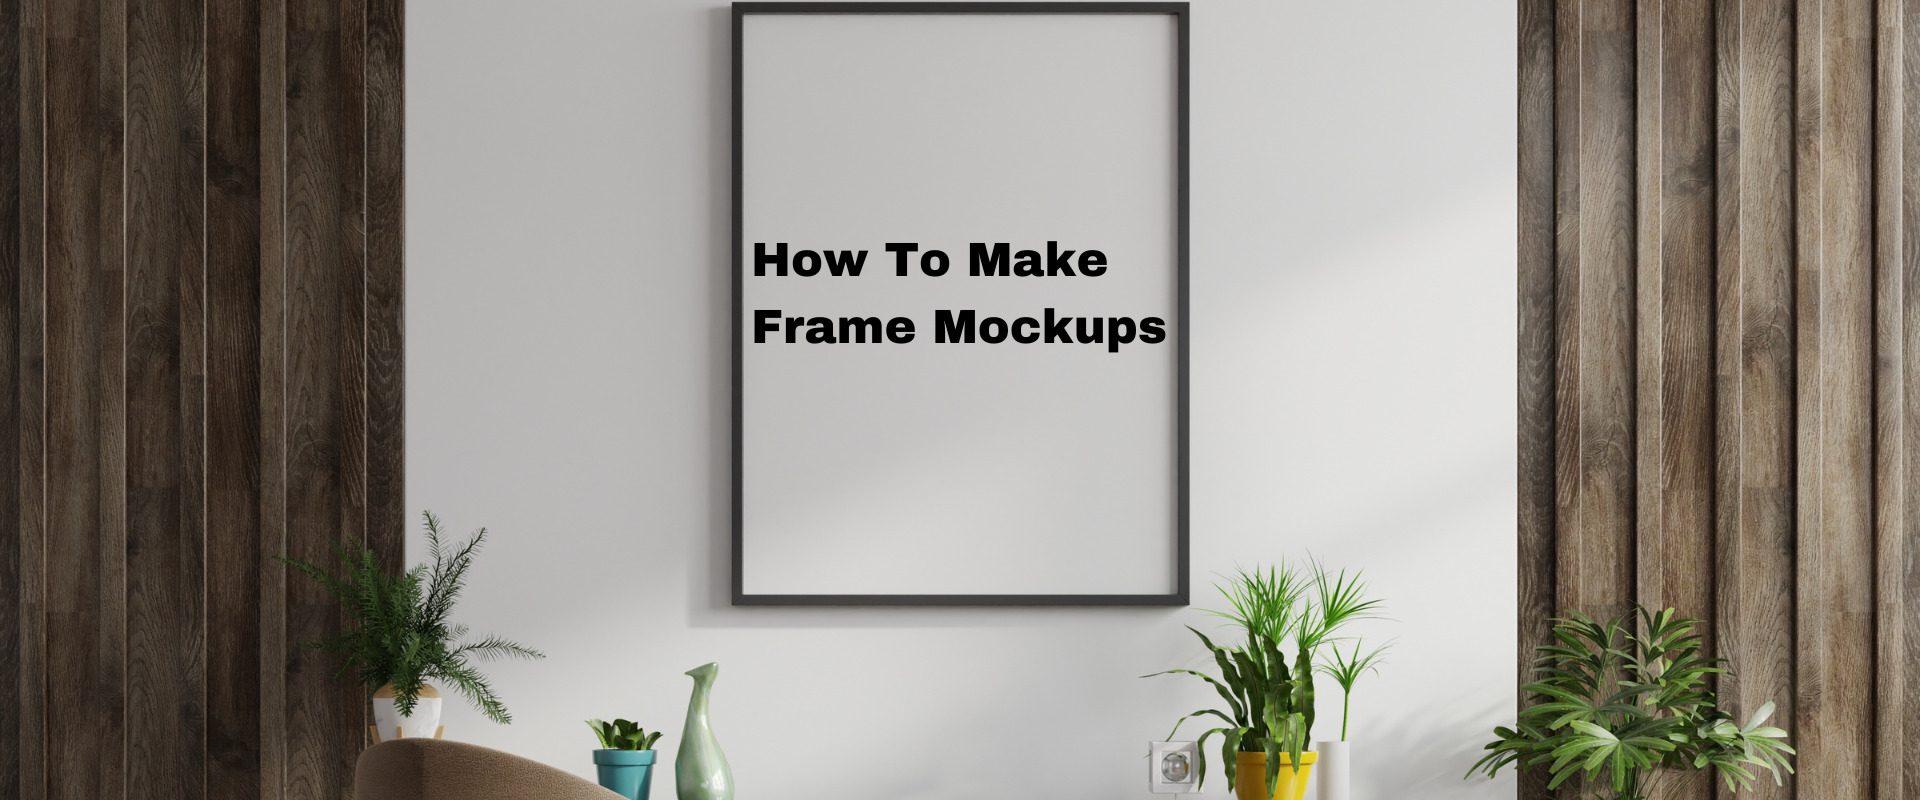 How to Make a Frame Mockup in 3 Easy Steps